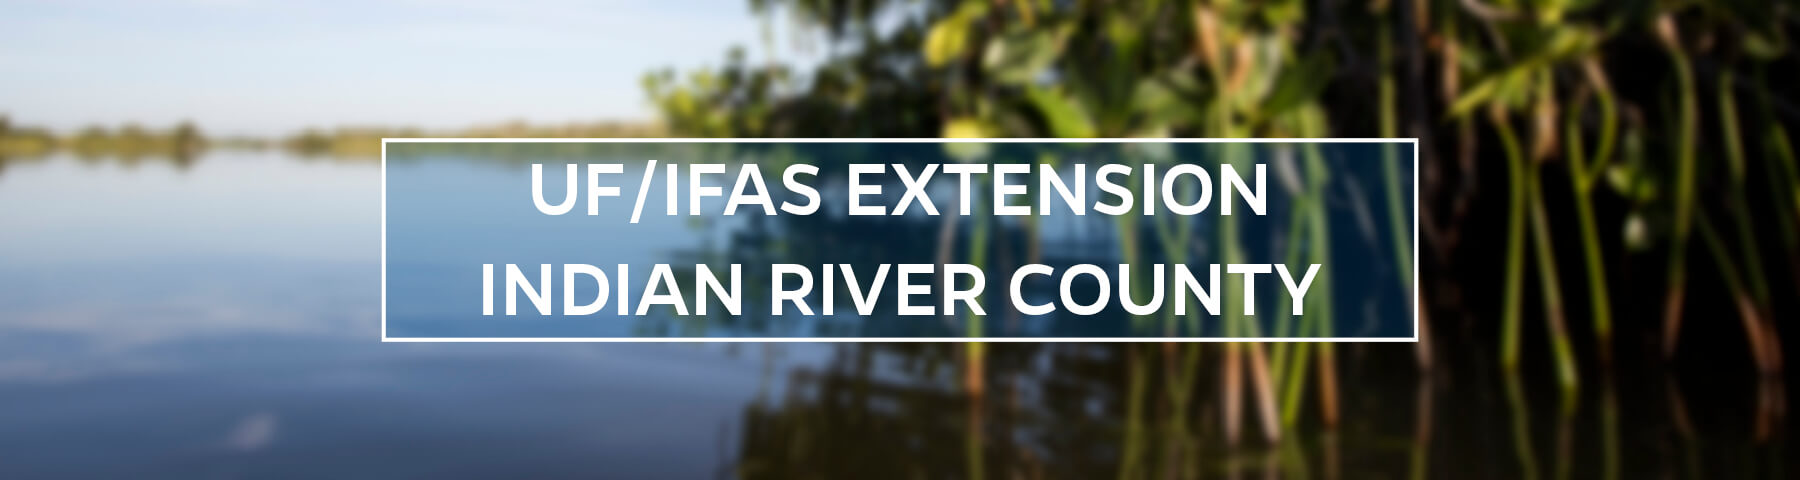 UF/IFAS Extension Indian River County